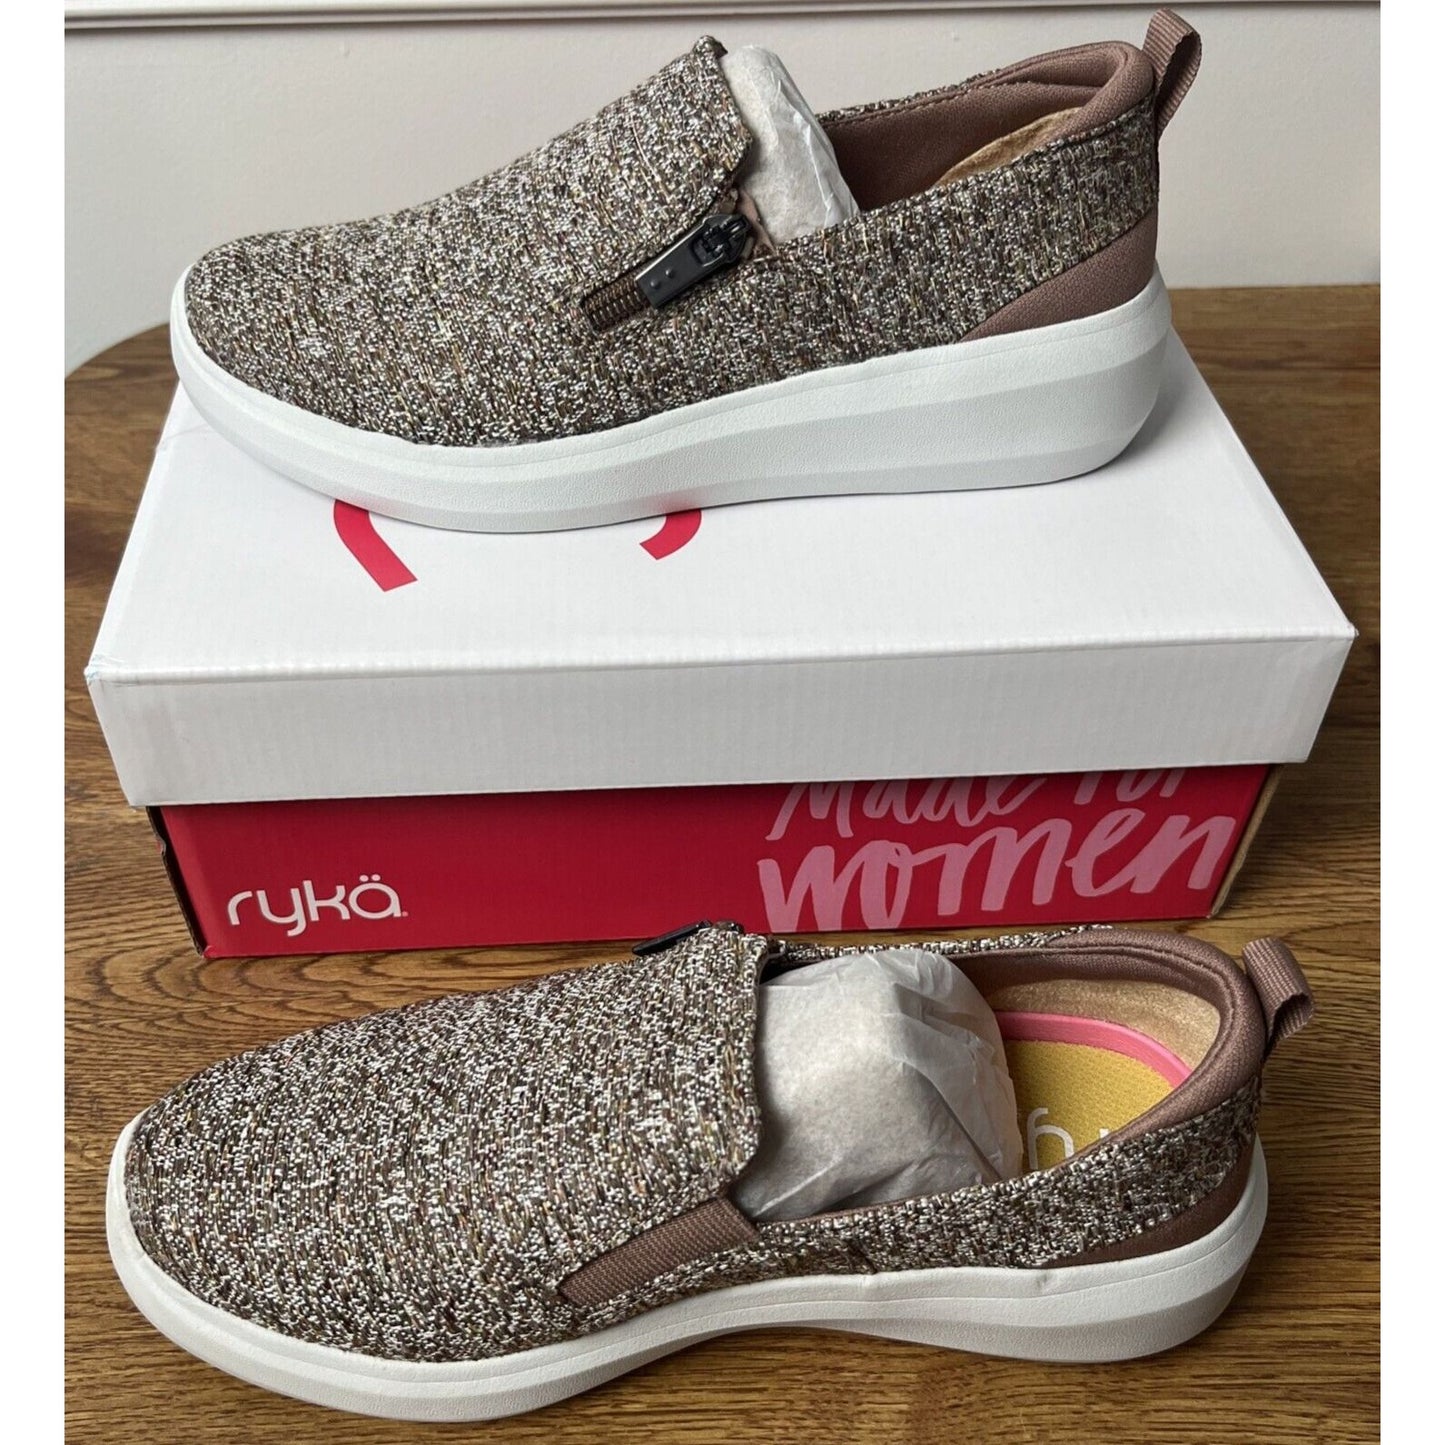 Ryka Women’s Slip-On Shoes with Zip Detail Ally Heathered Beaver Brown 5M NEW